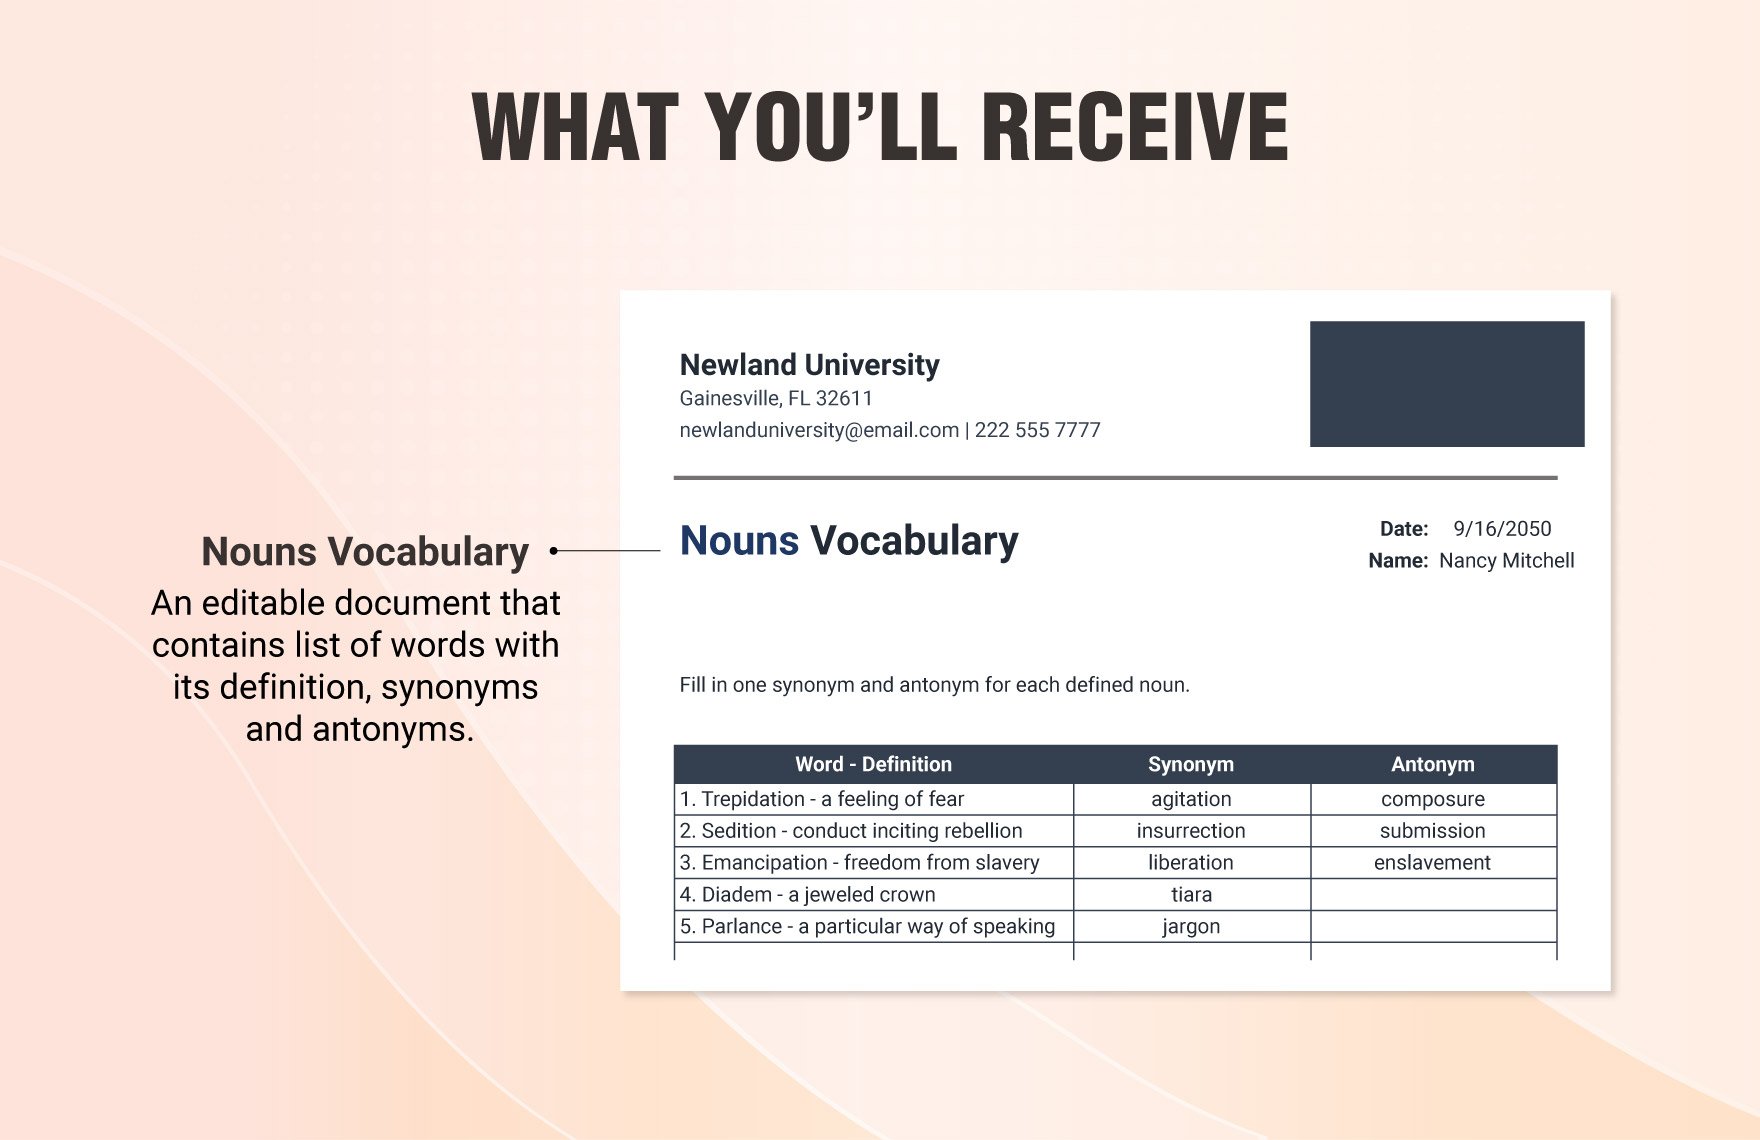 Vocabulary Worksheet Template for Nouns